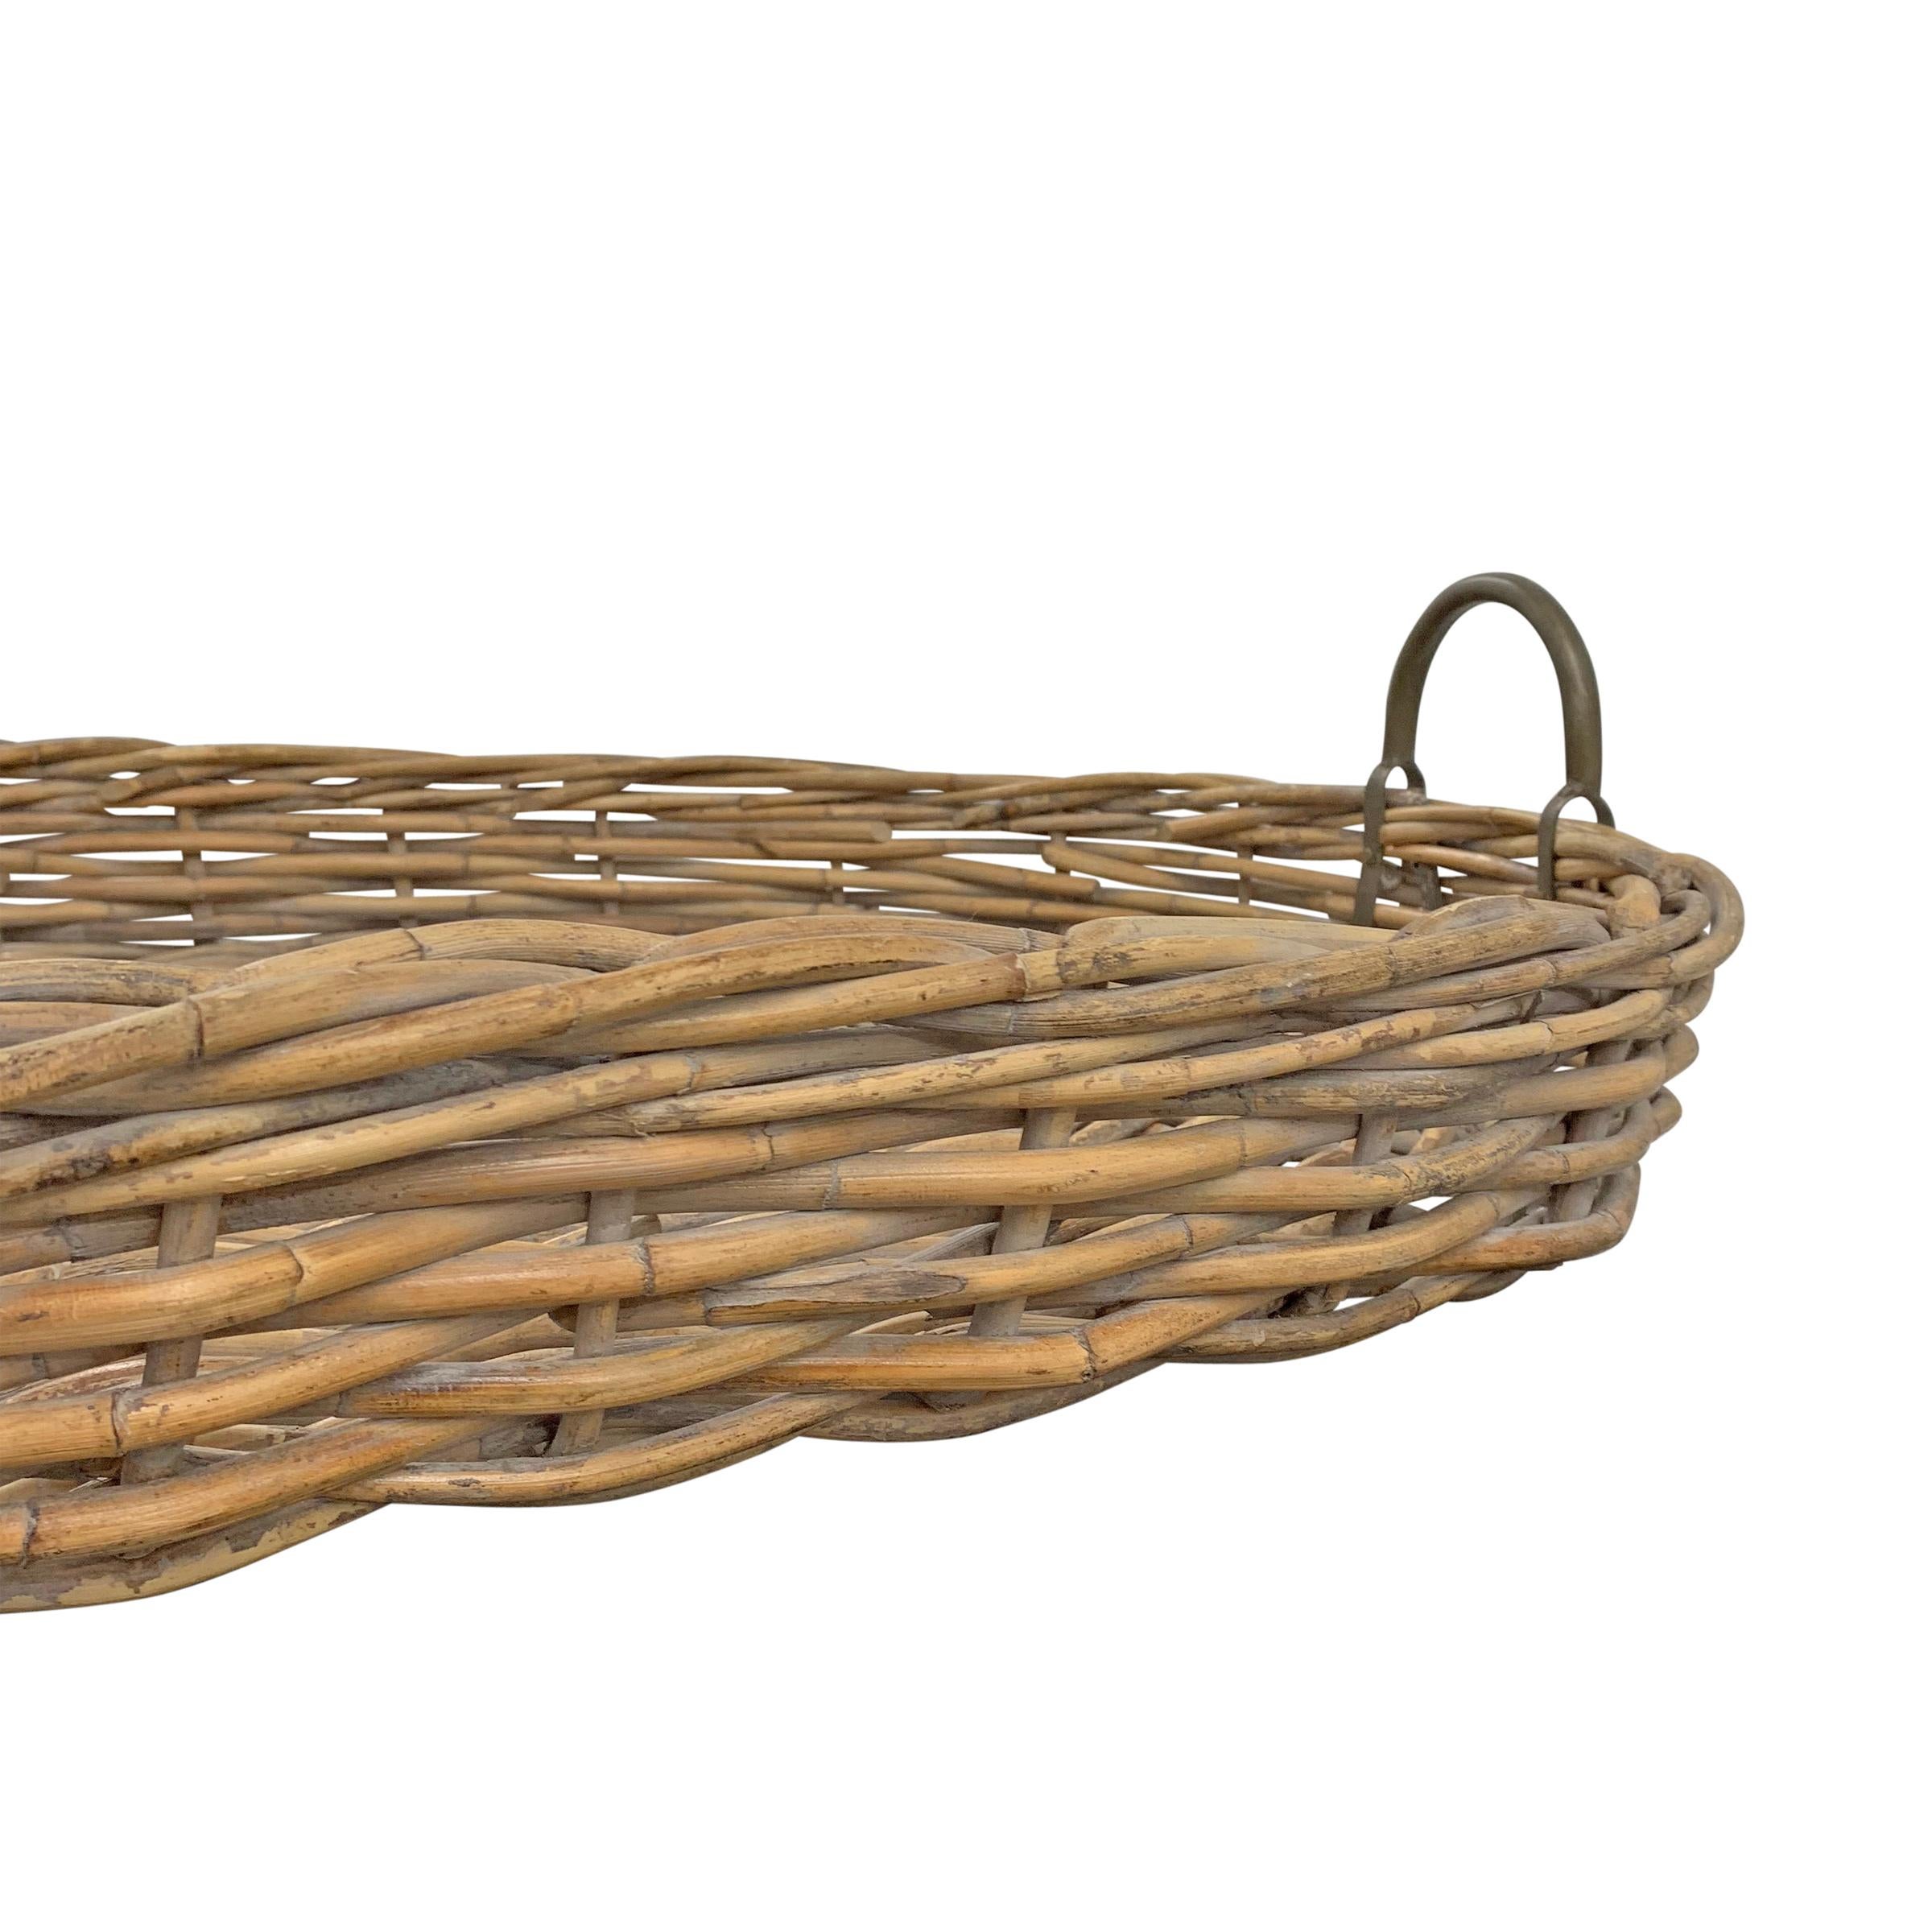 Rustic Large Woven Willow Tray